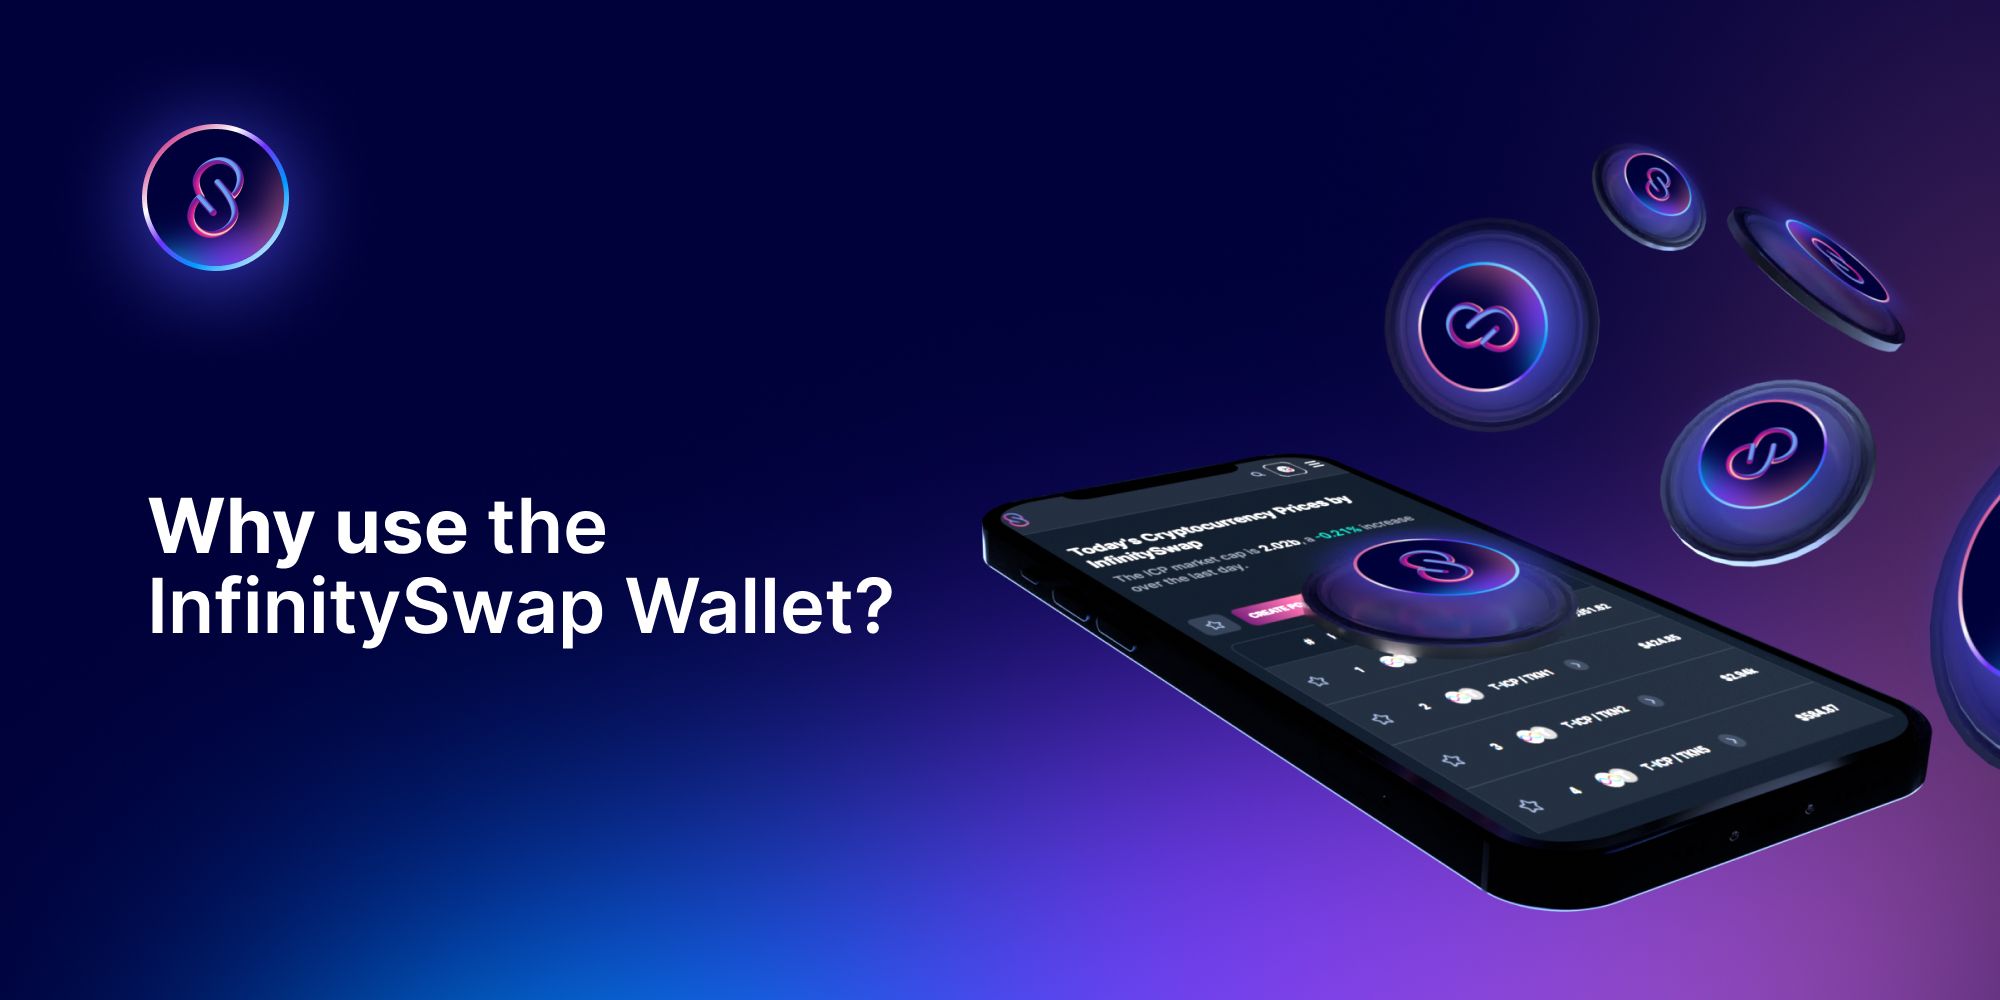 Why use the InfinitySwap Wallet?